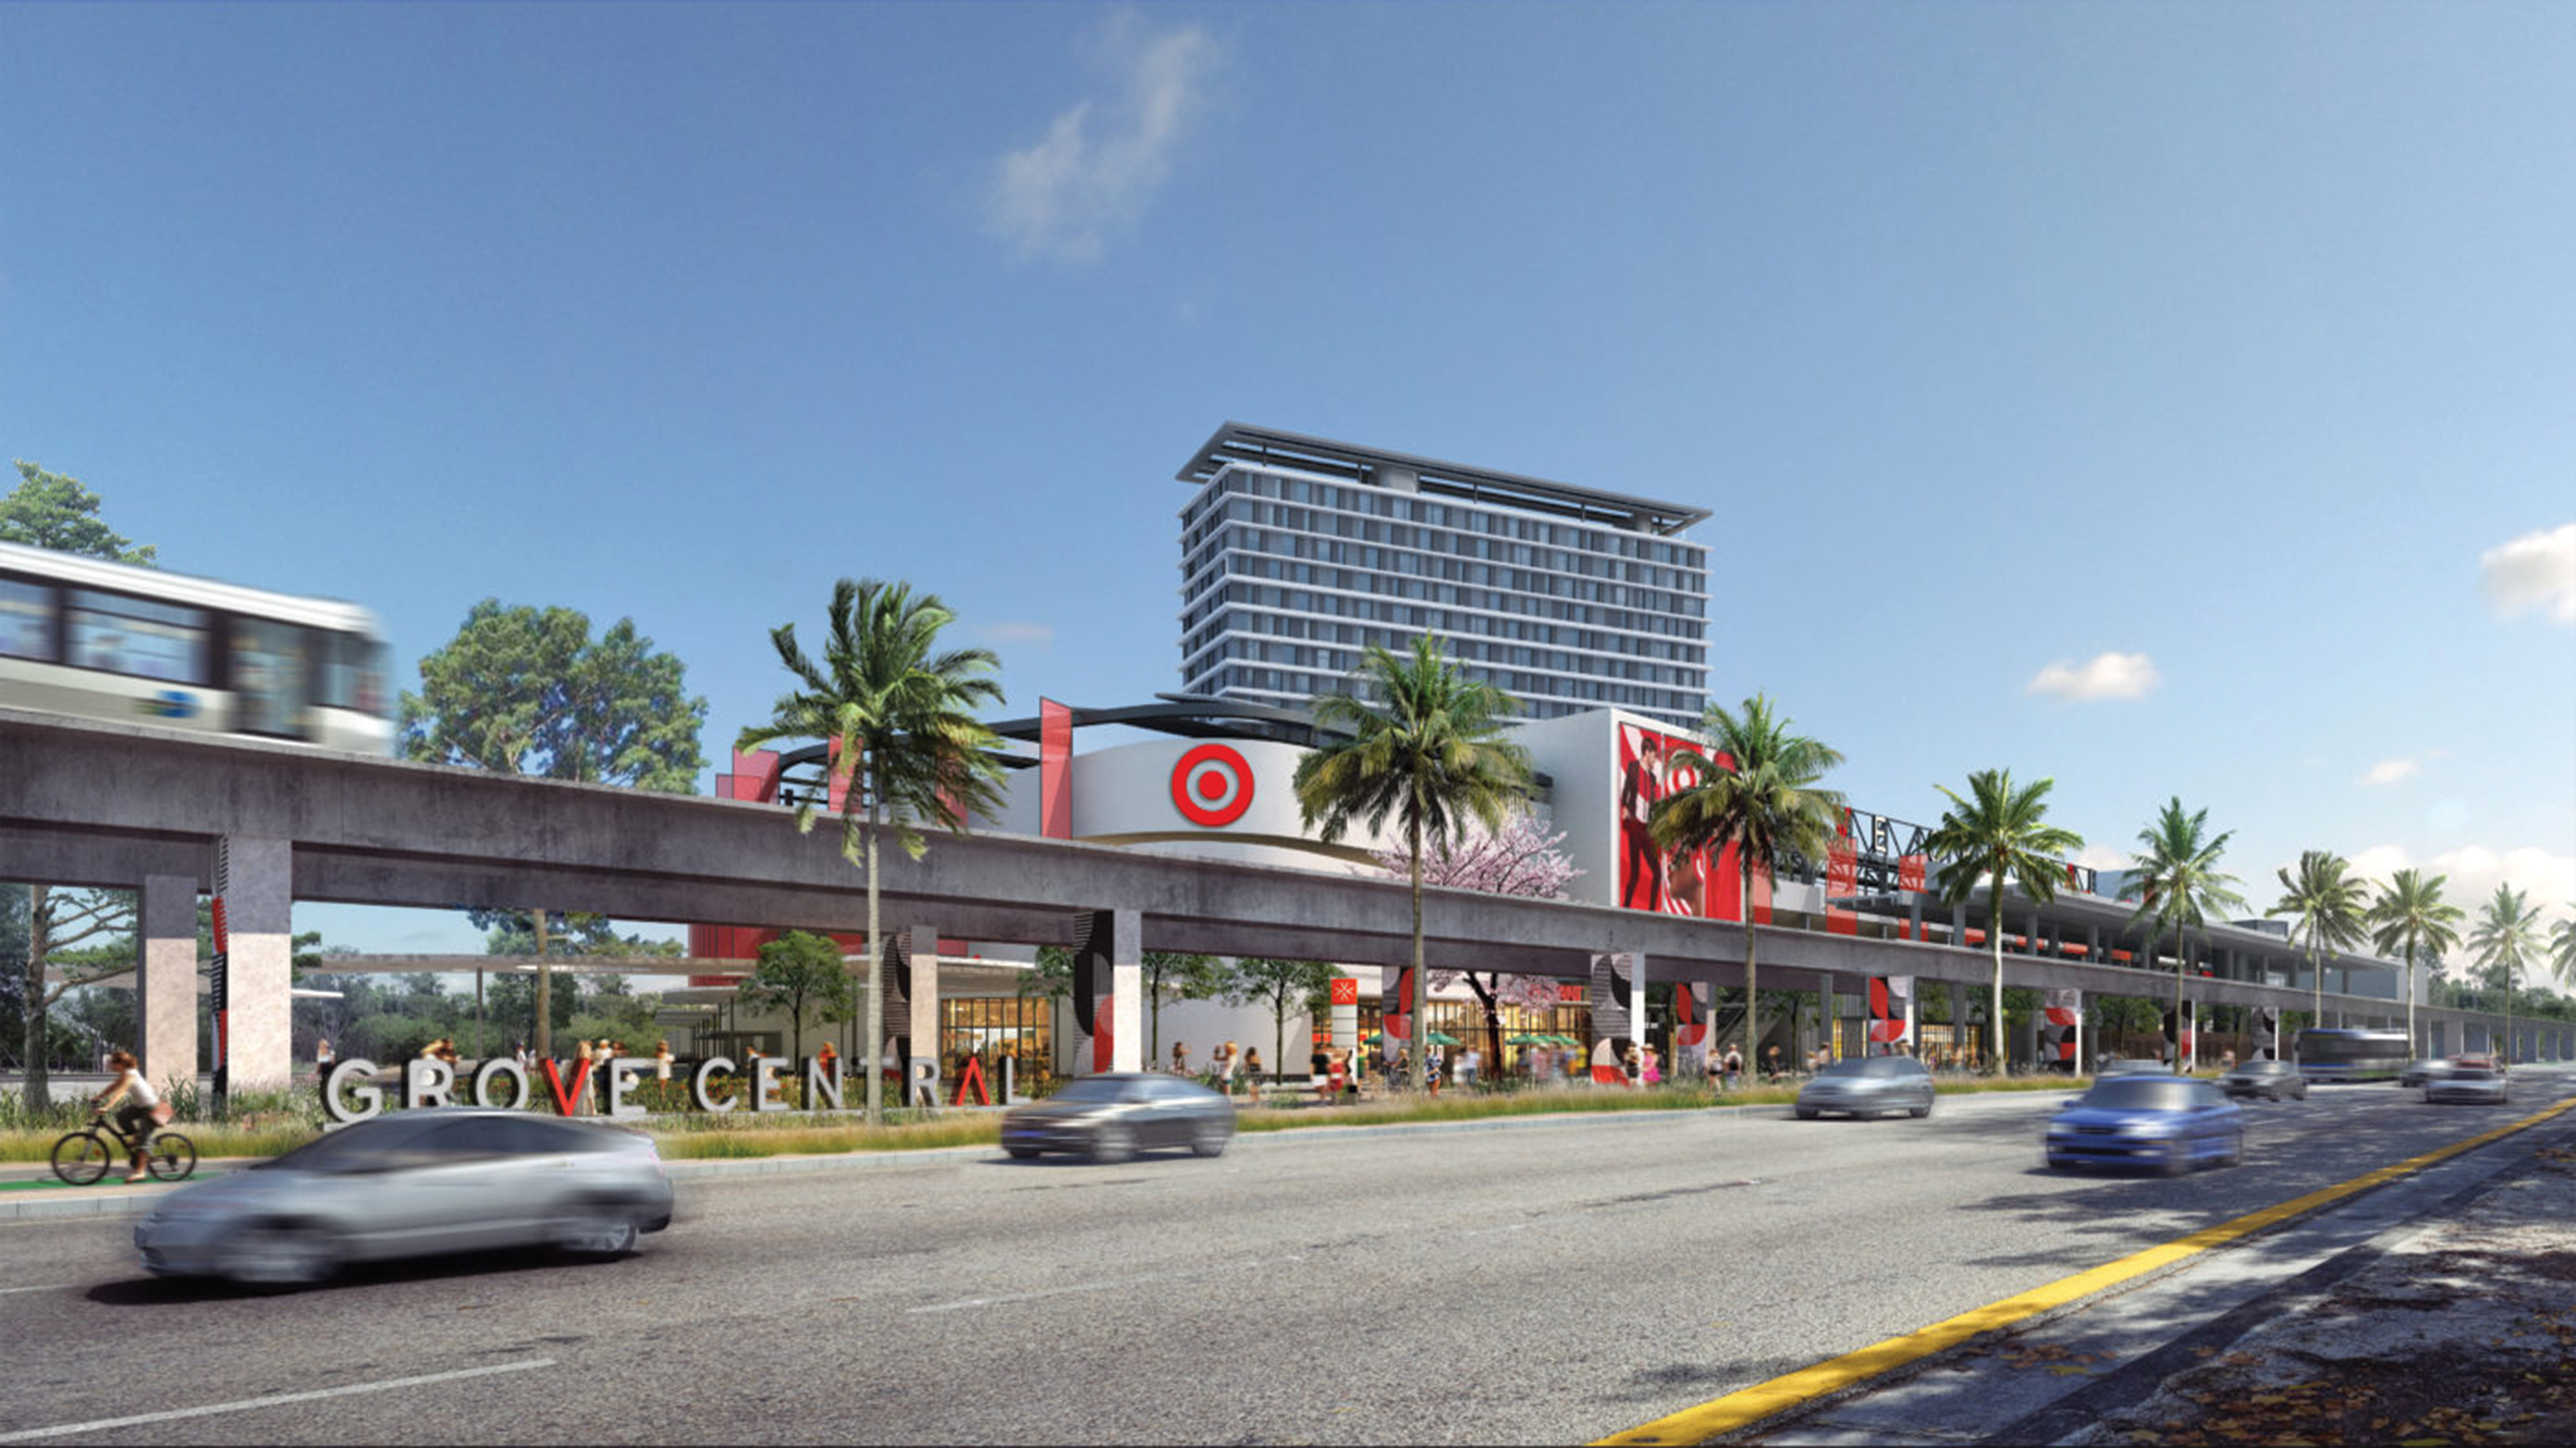 A rendering depicting Grove Central, a mixed-use project located along Miami's new Underline linear park.